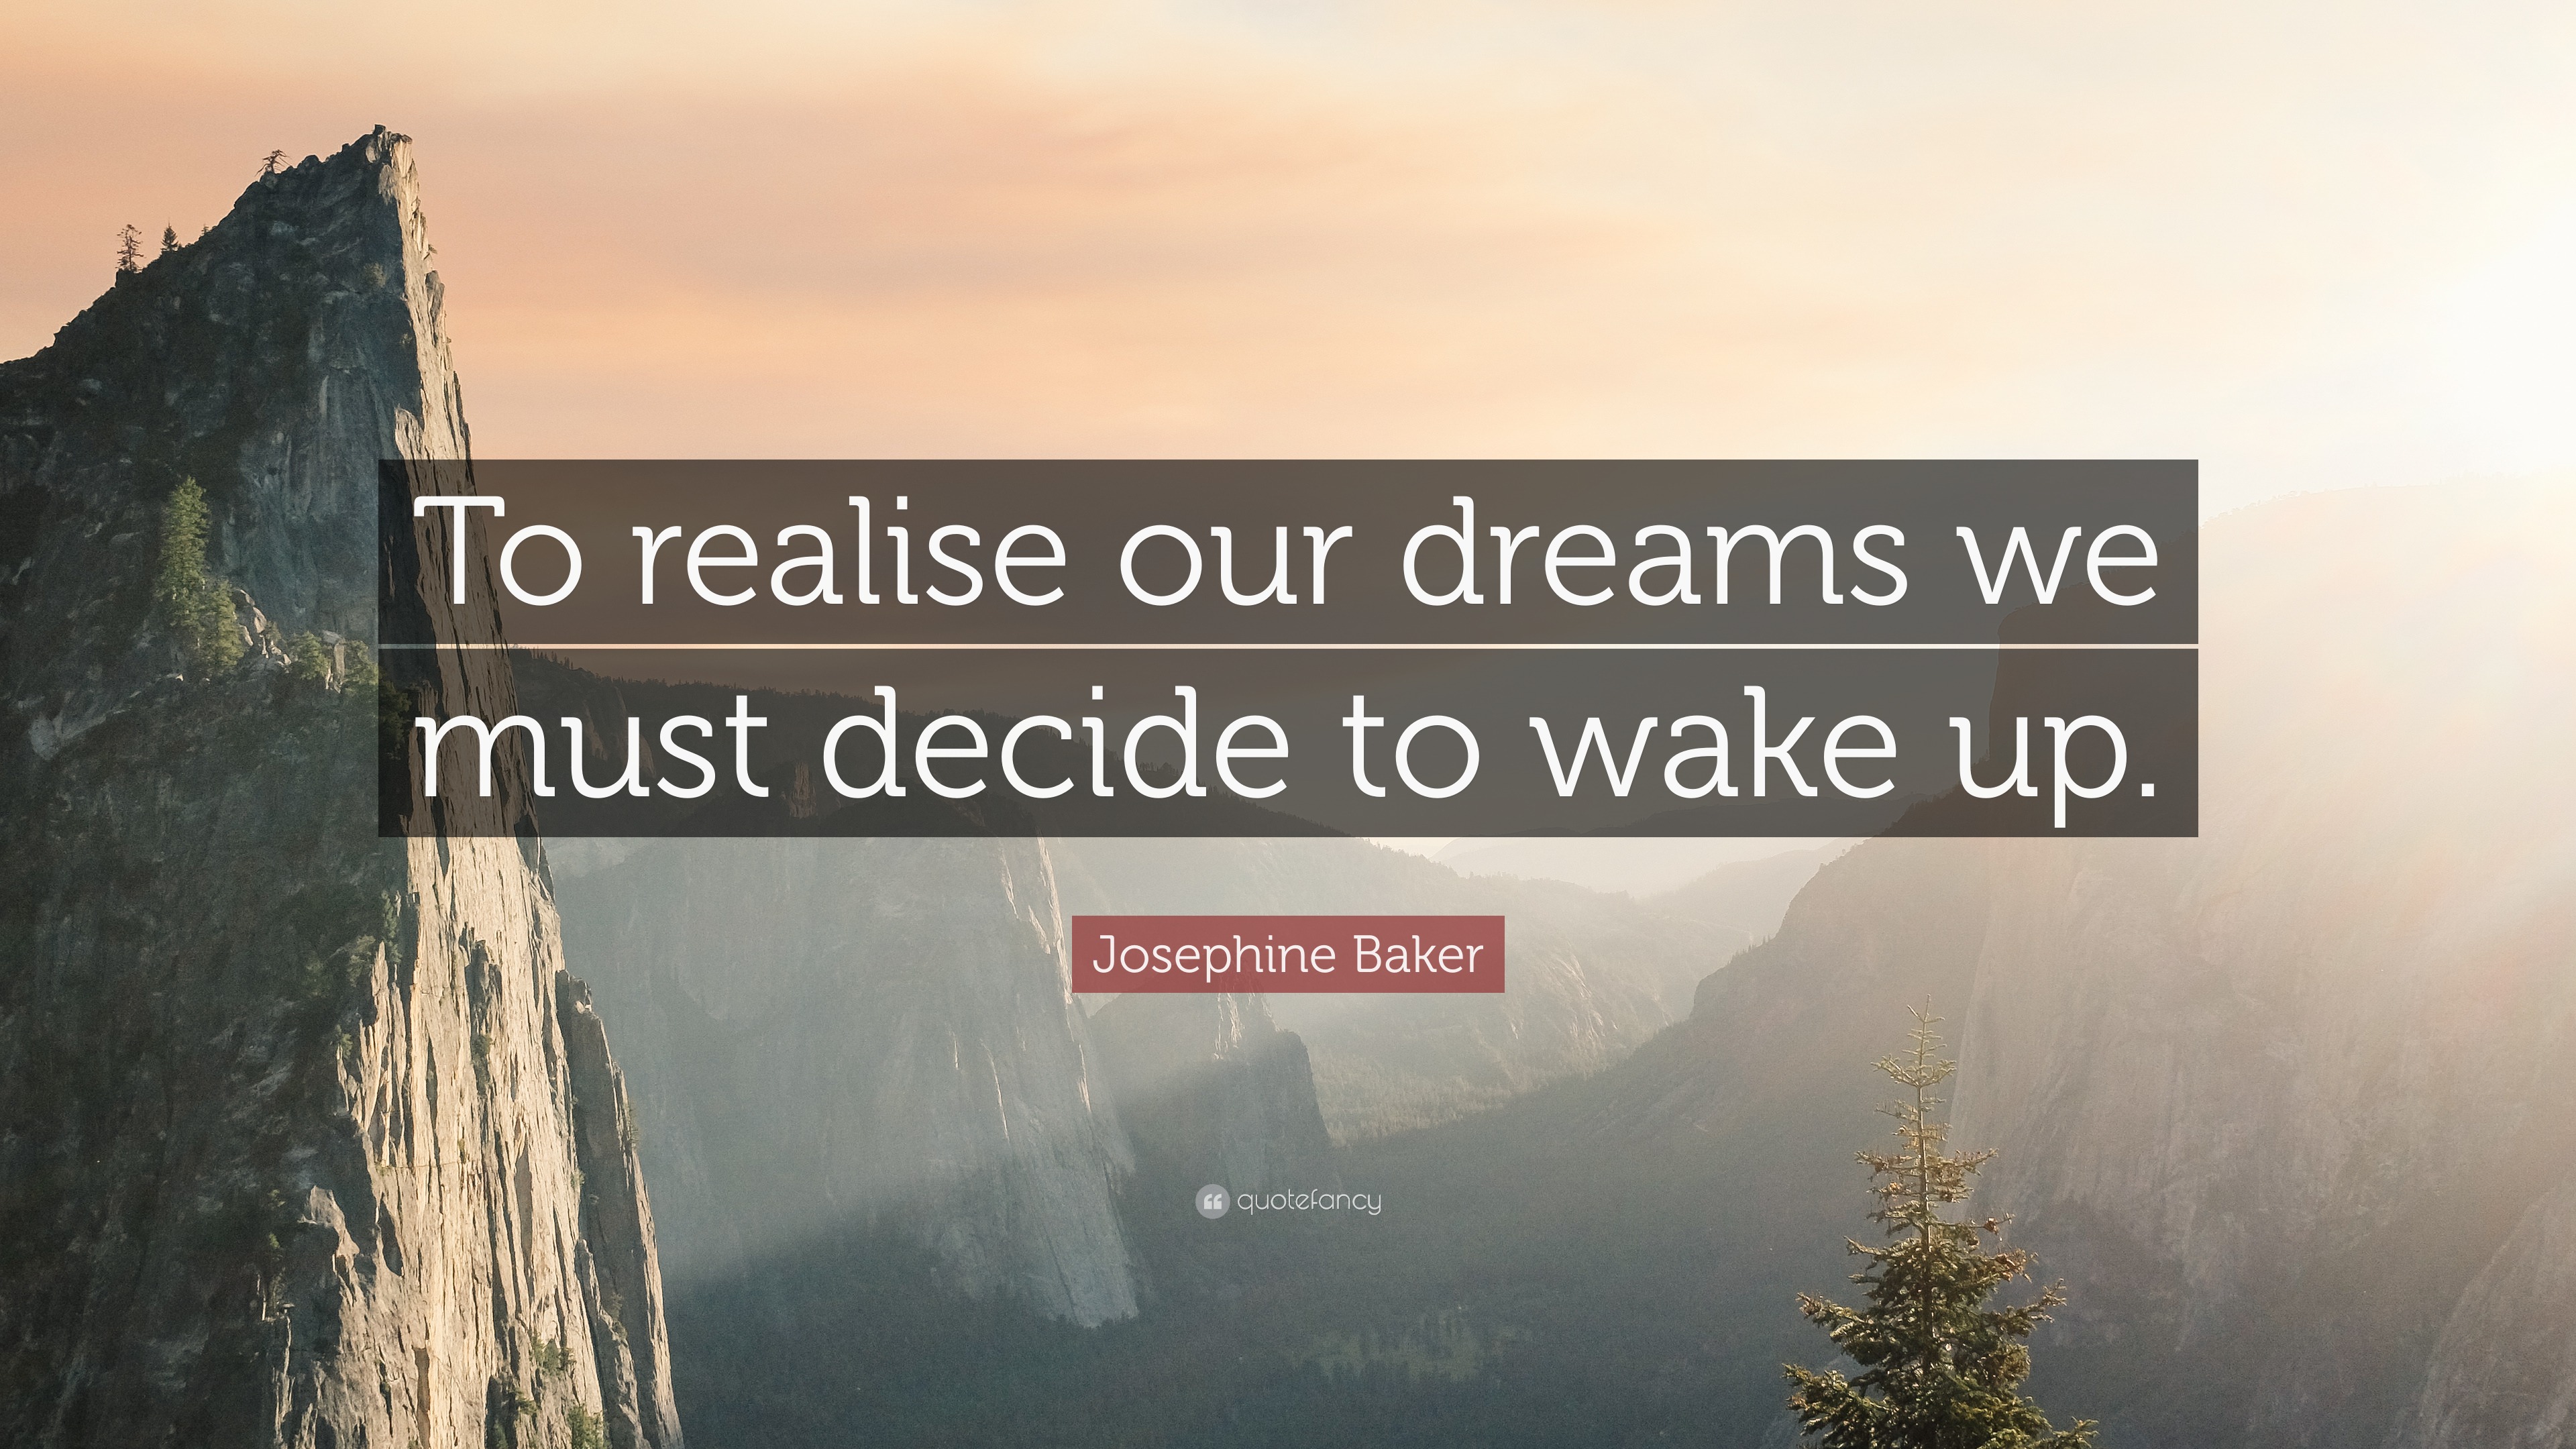 Josephine Baker Quote: "To realise our dreams we must ...